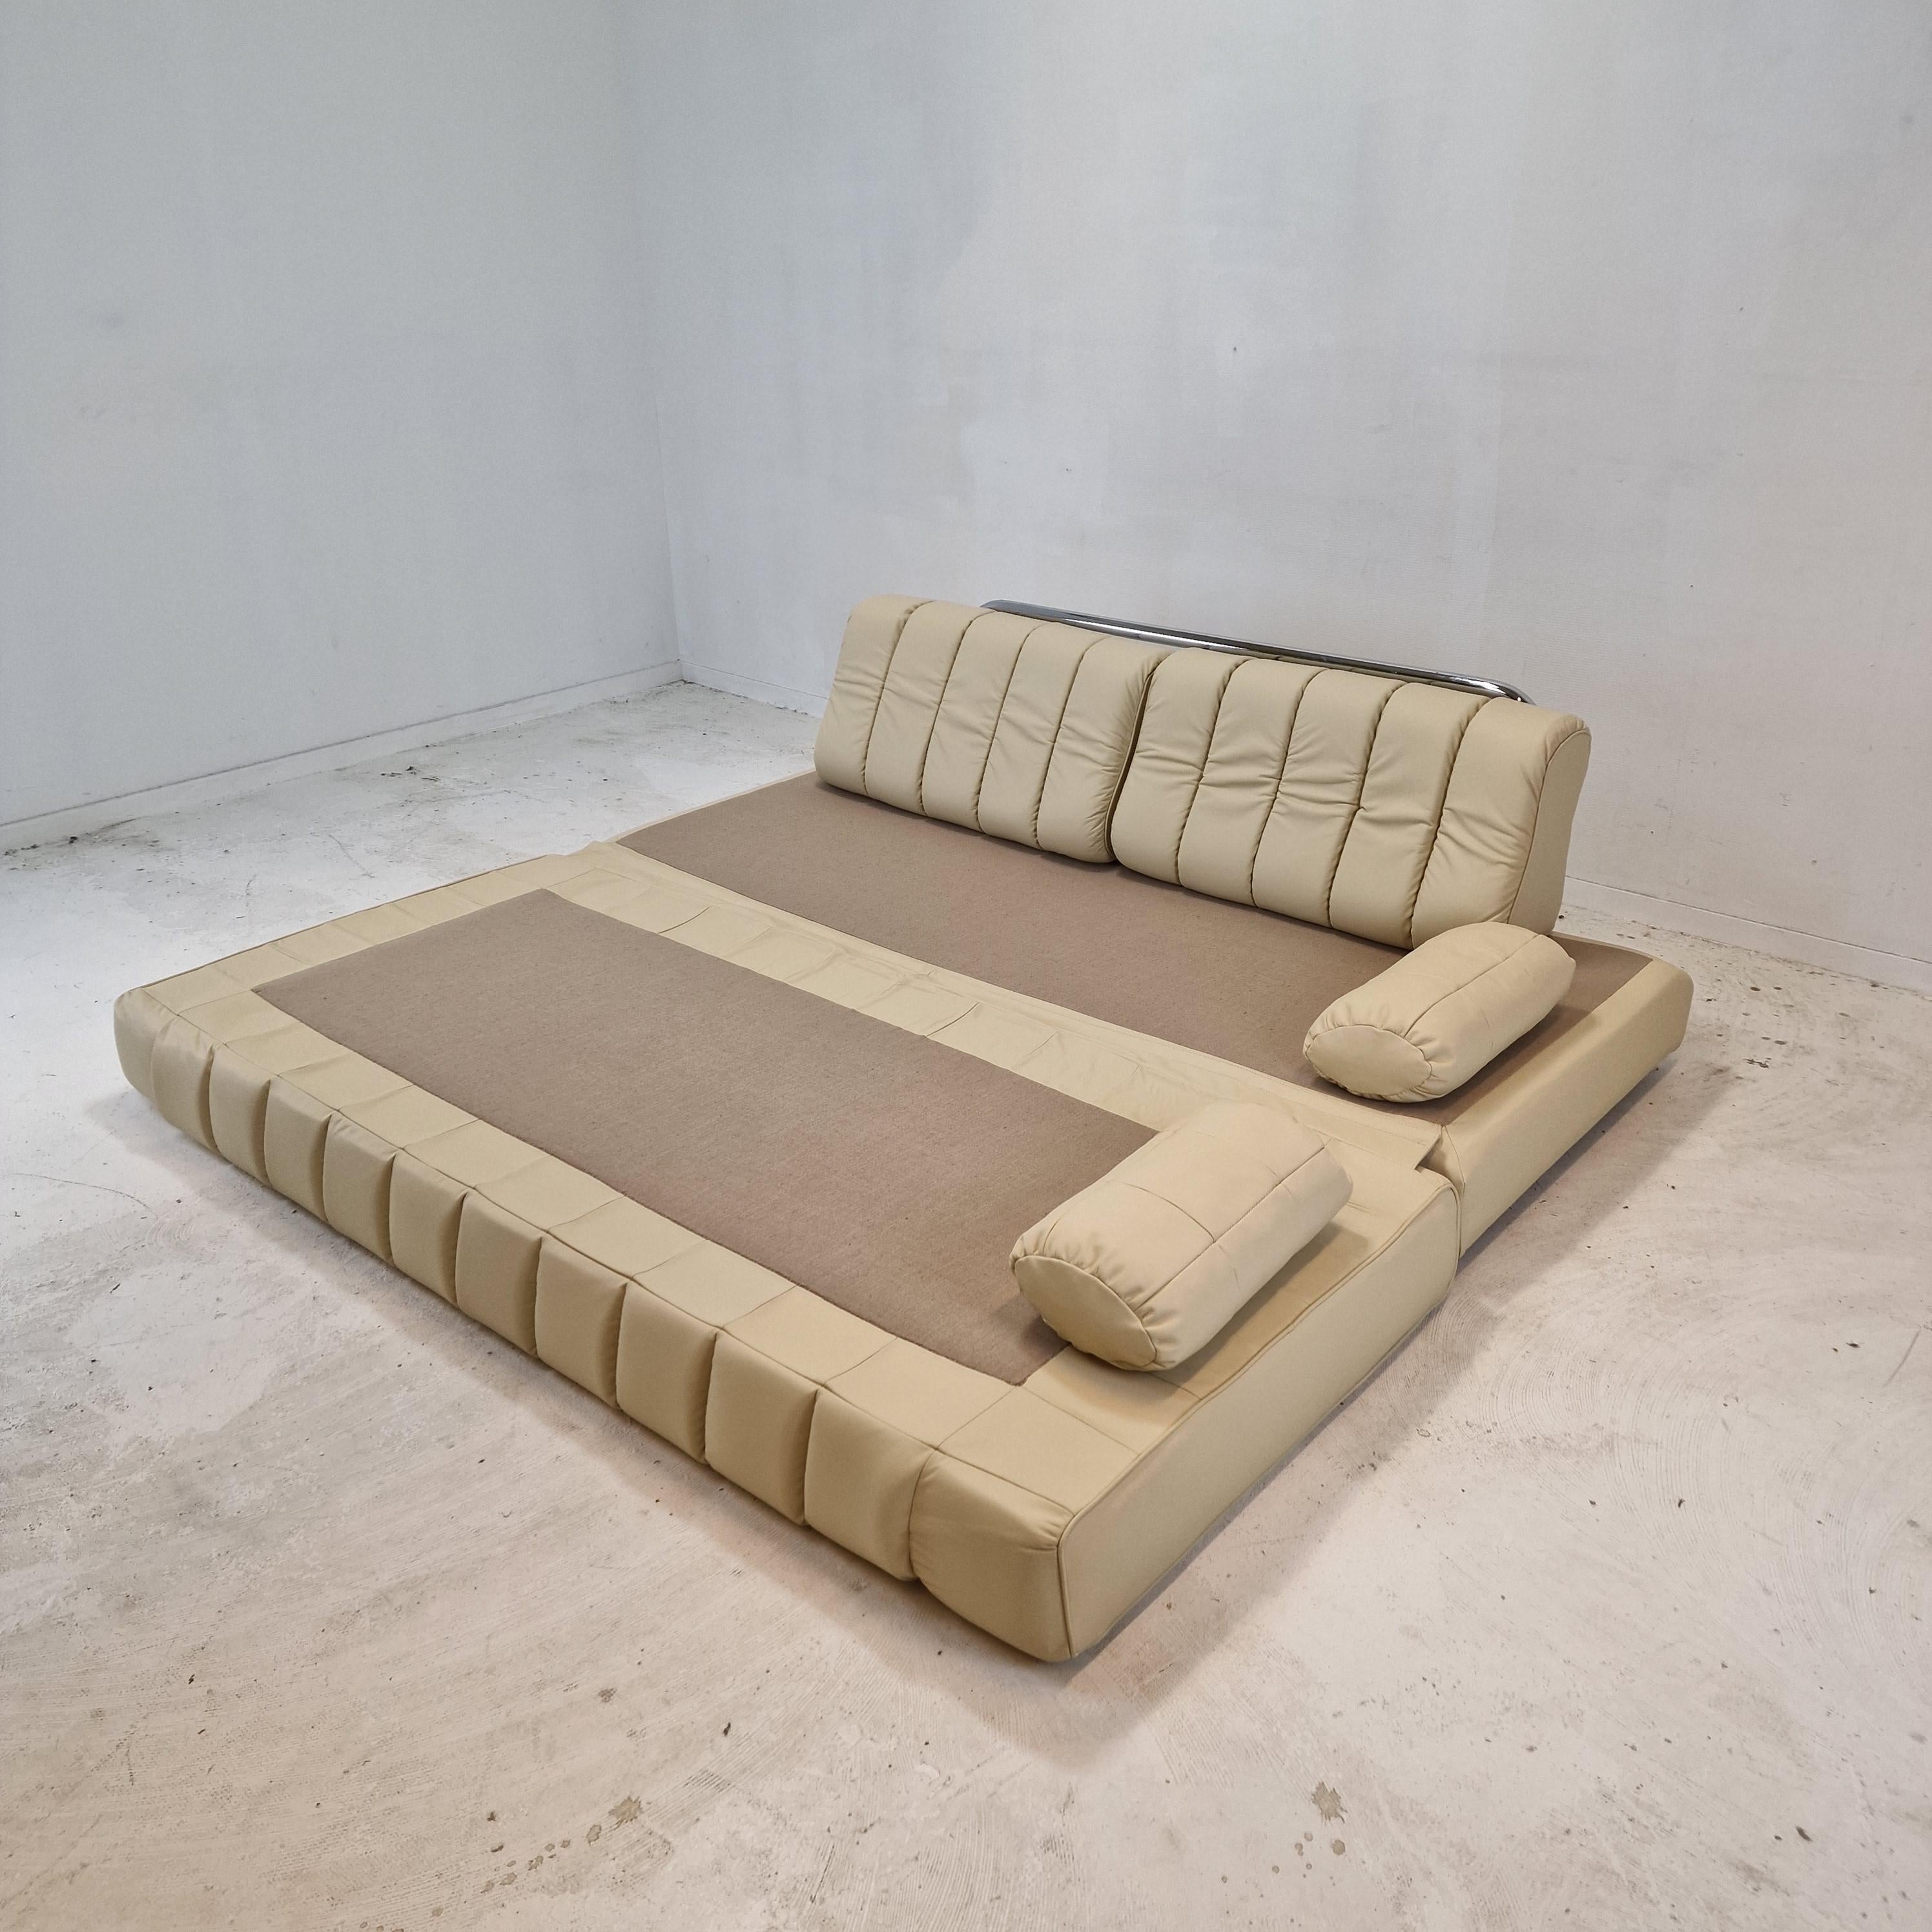 DS-85 Sofa or Daybed by De Sede, Switzerland 1970s For Sale 6